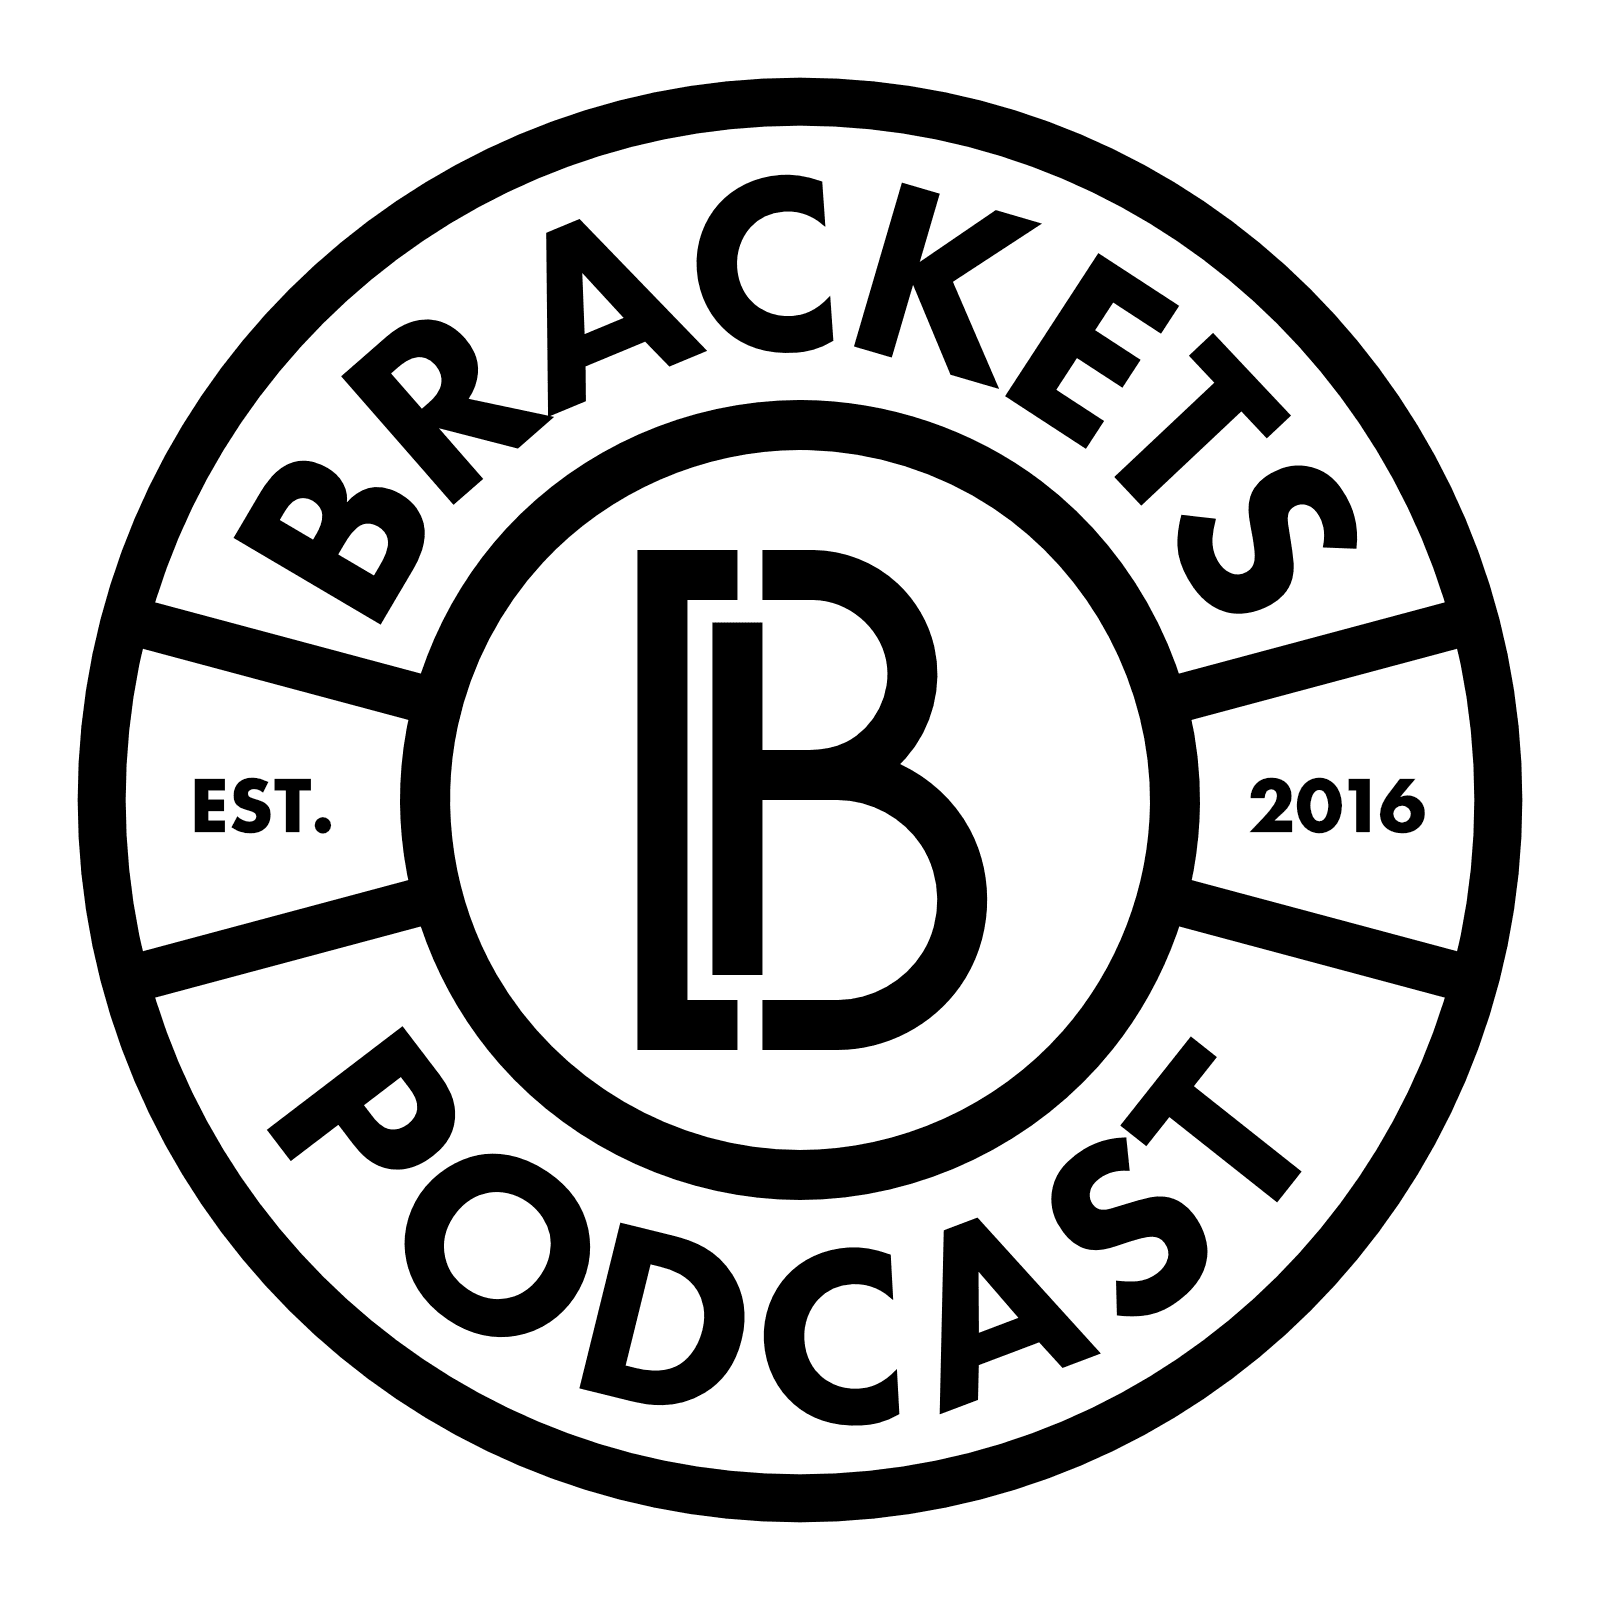 Another spin of the design of the ADP's Developer Community Brackets Podcast logo